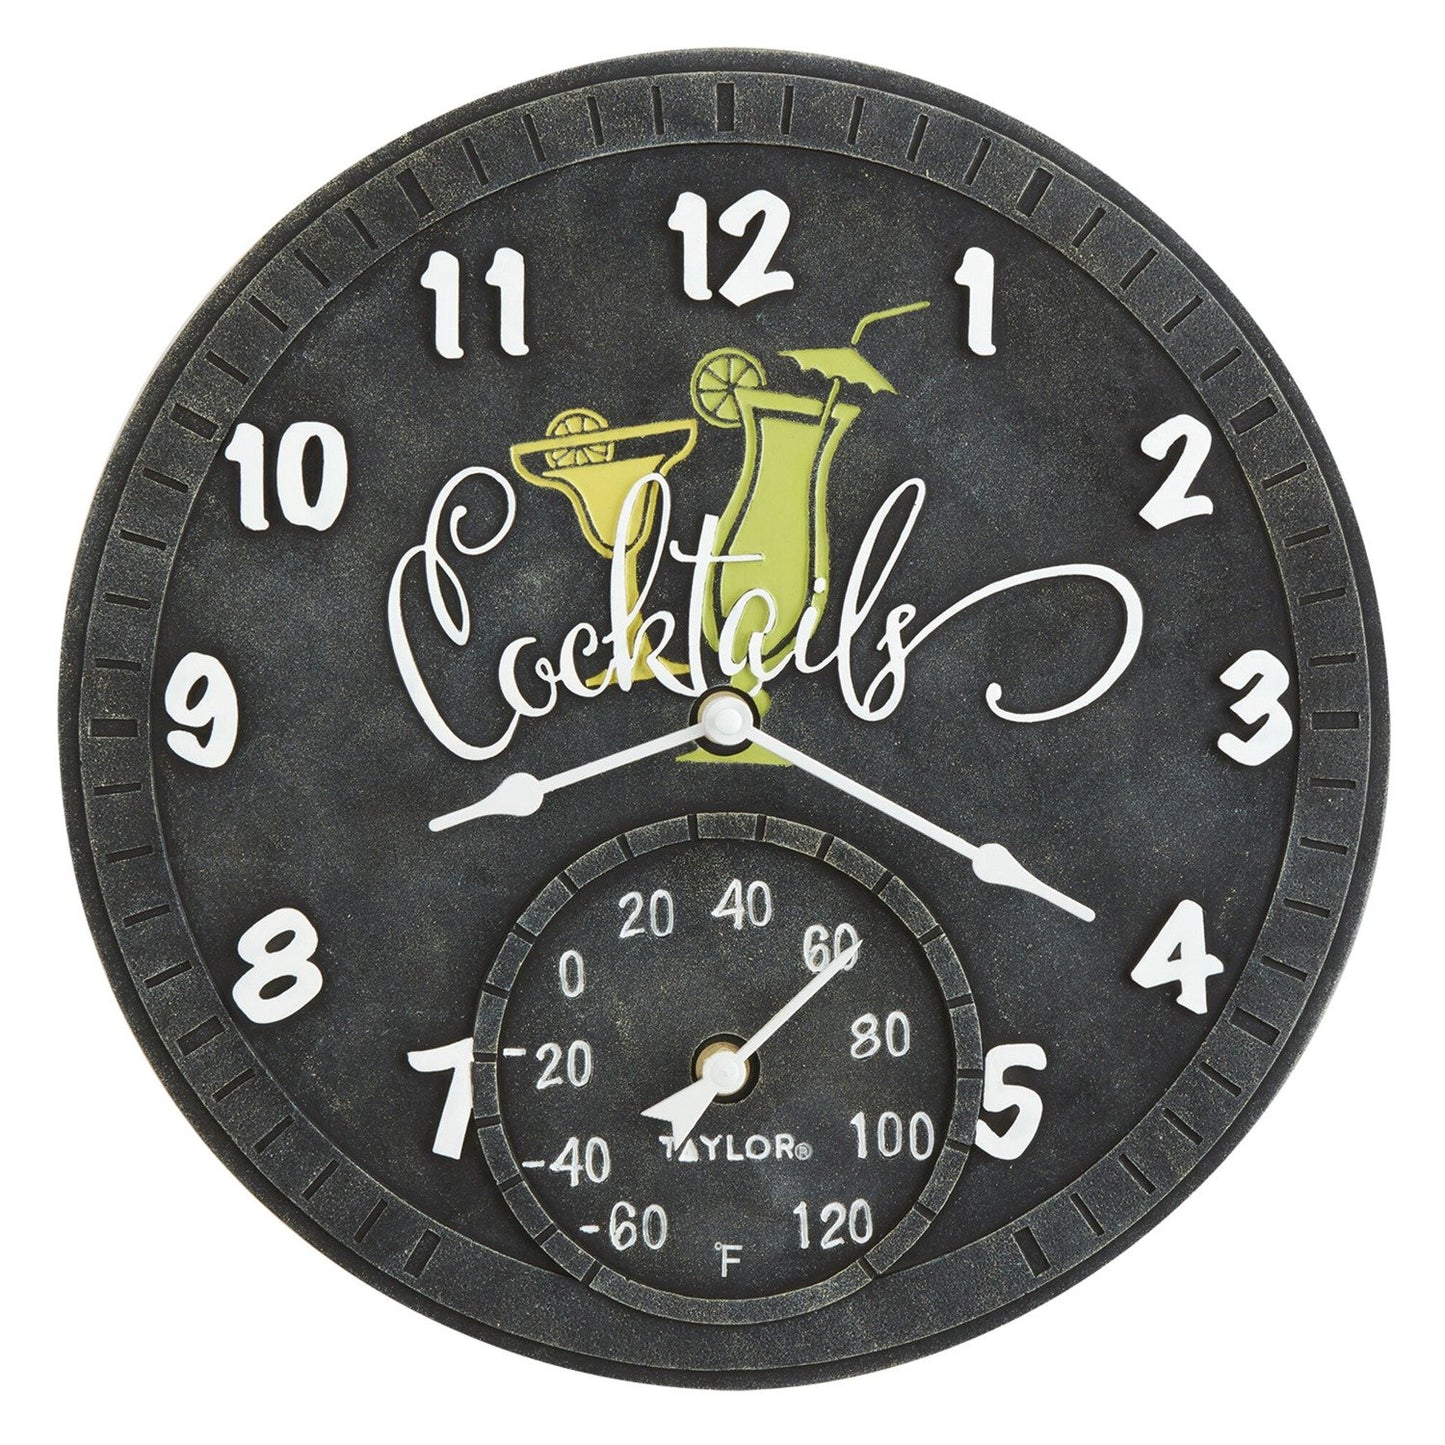 Taylor Precision Products 5265970 14-Inch Clock with Thermometer (Cocktails)